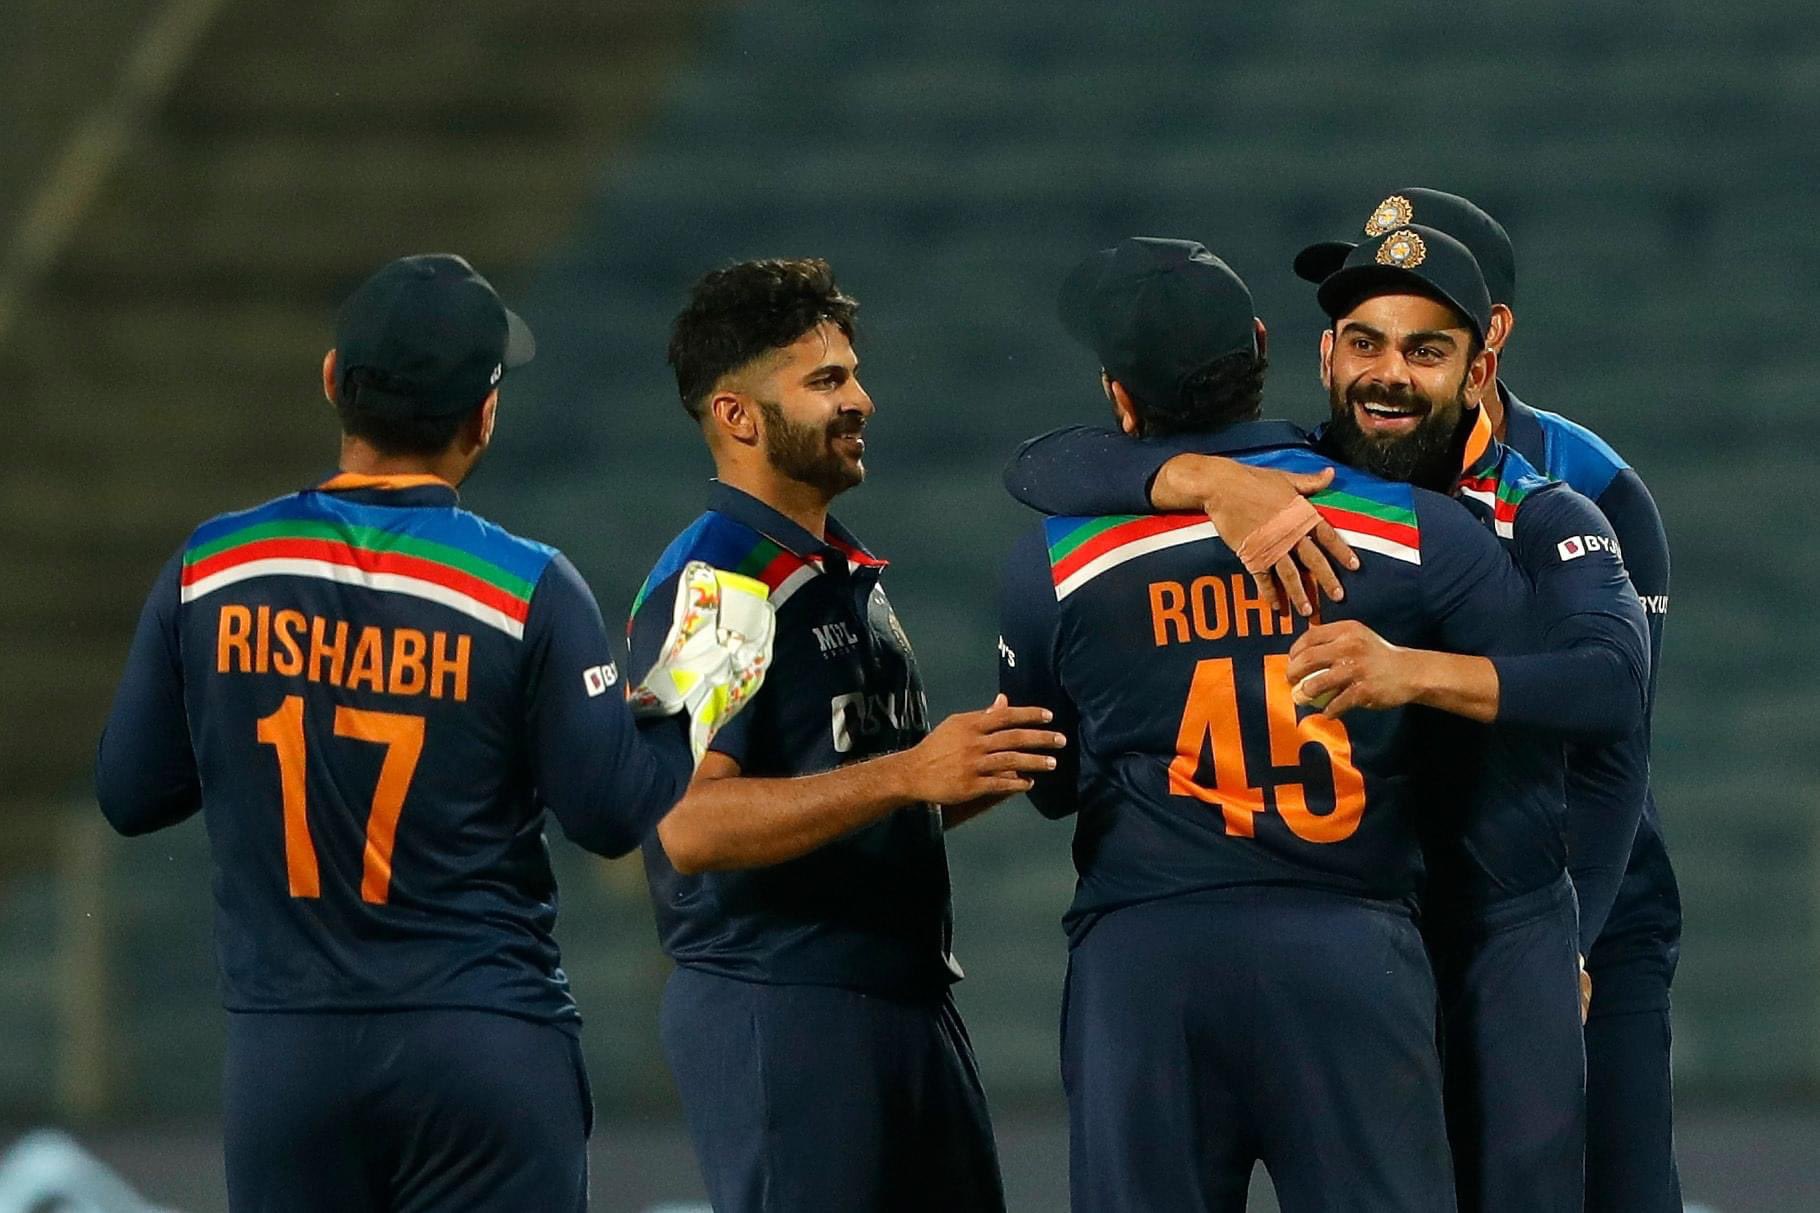 Ind vs Eng 2021, 3rd ODI: India Defy Sam Curran Heroics to Win Series